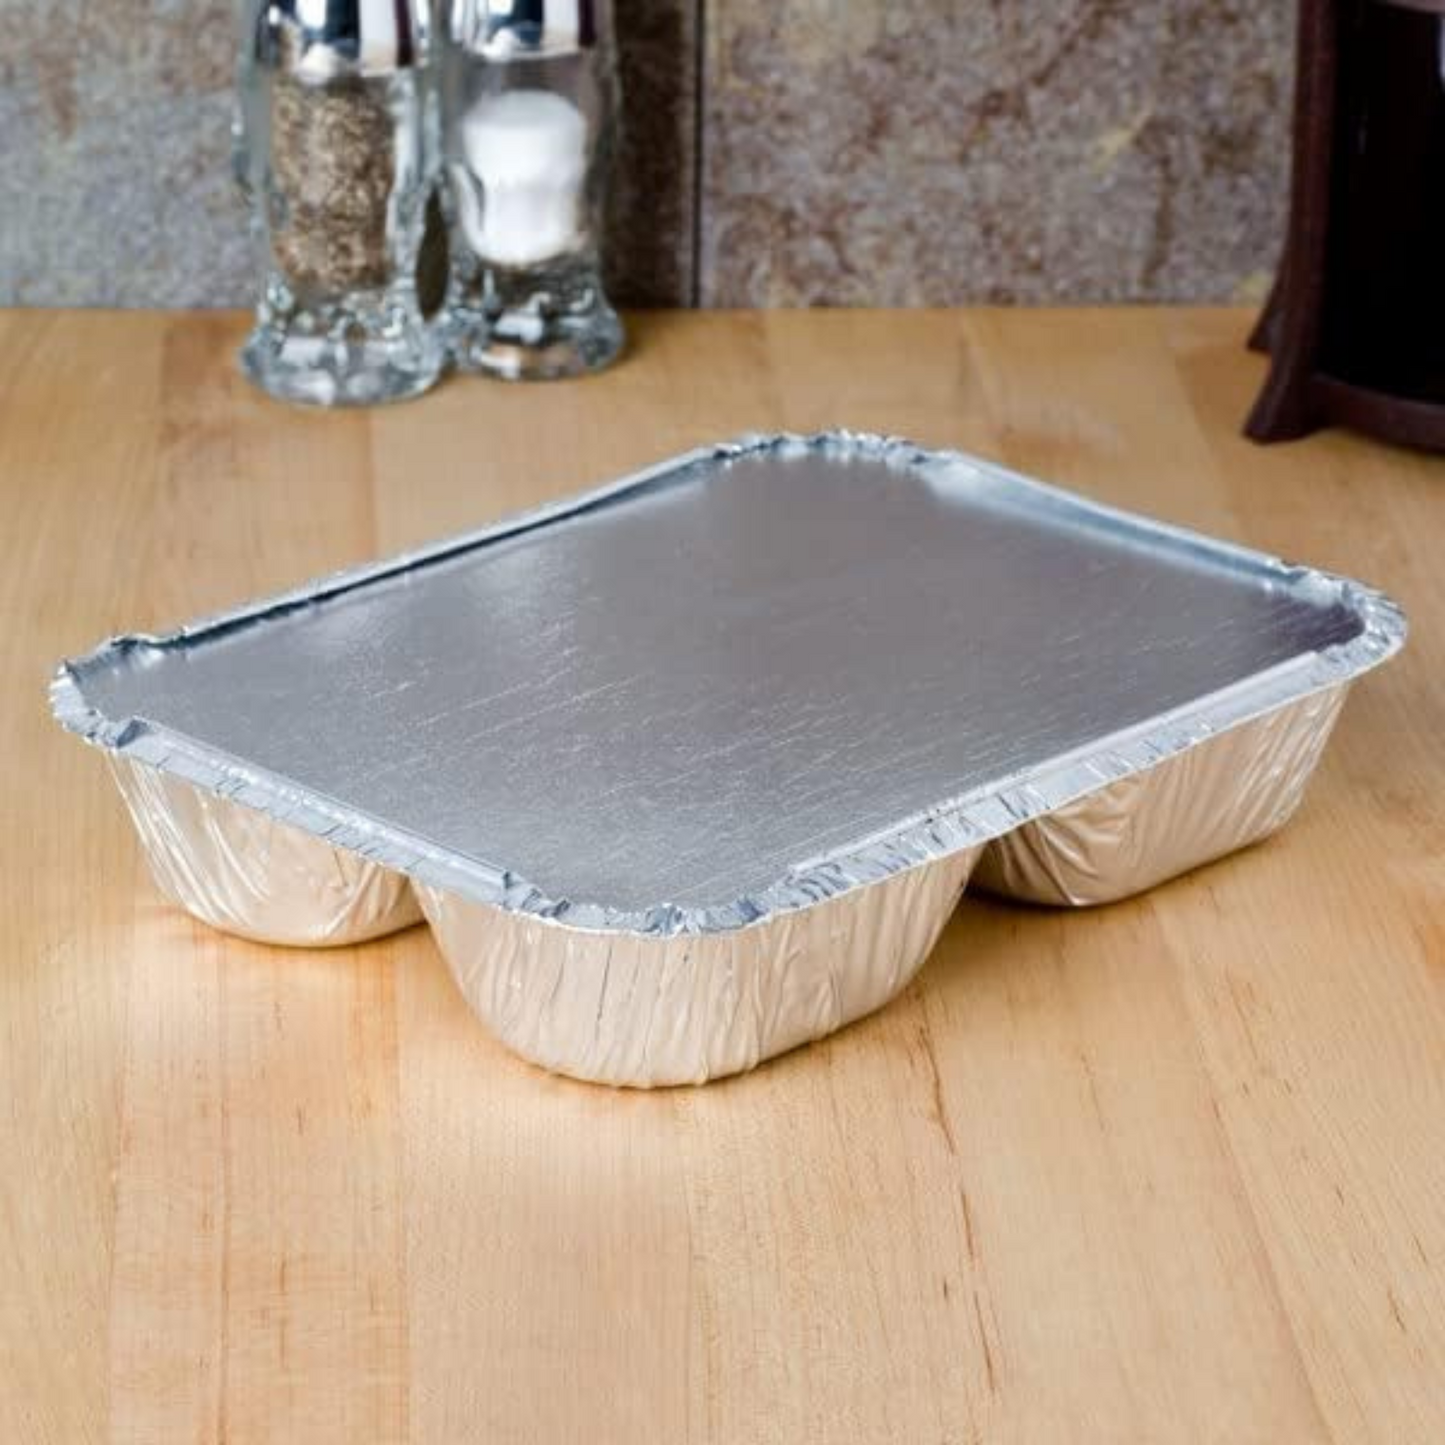 Disposable 3 Compartment Aluminum Dinner Foil Pan/Tray with Board Lids Disposable VeZee   